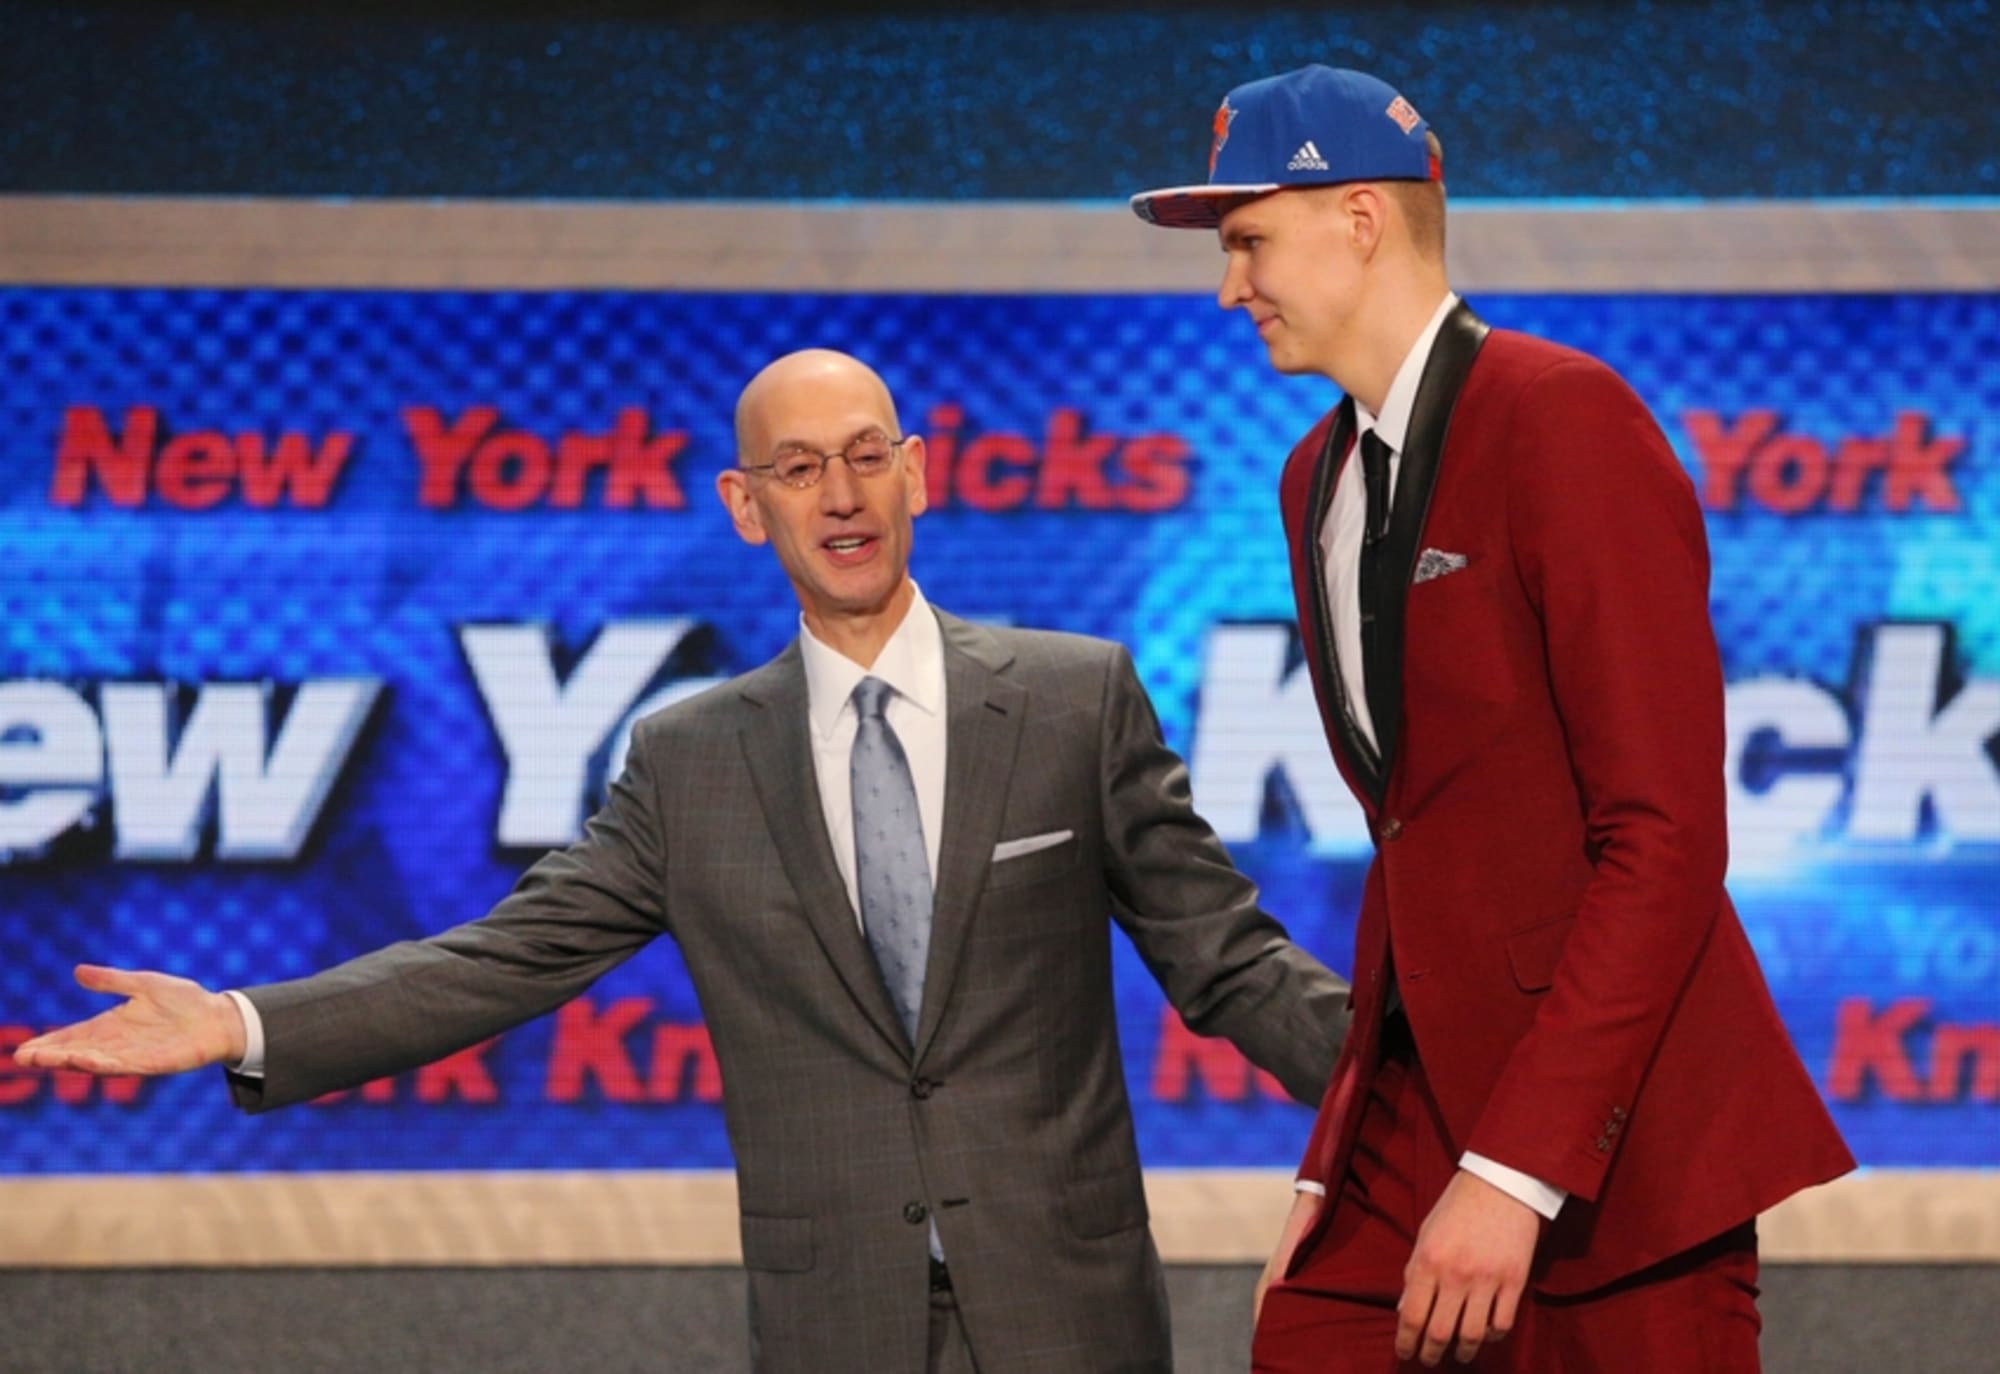 Knox shares advice Porzingis gave him after he was booed at Draft